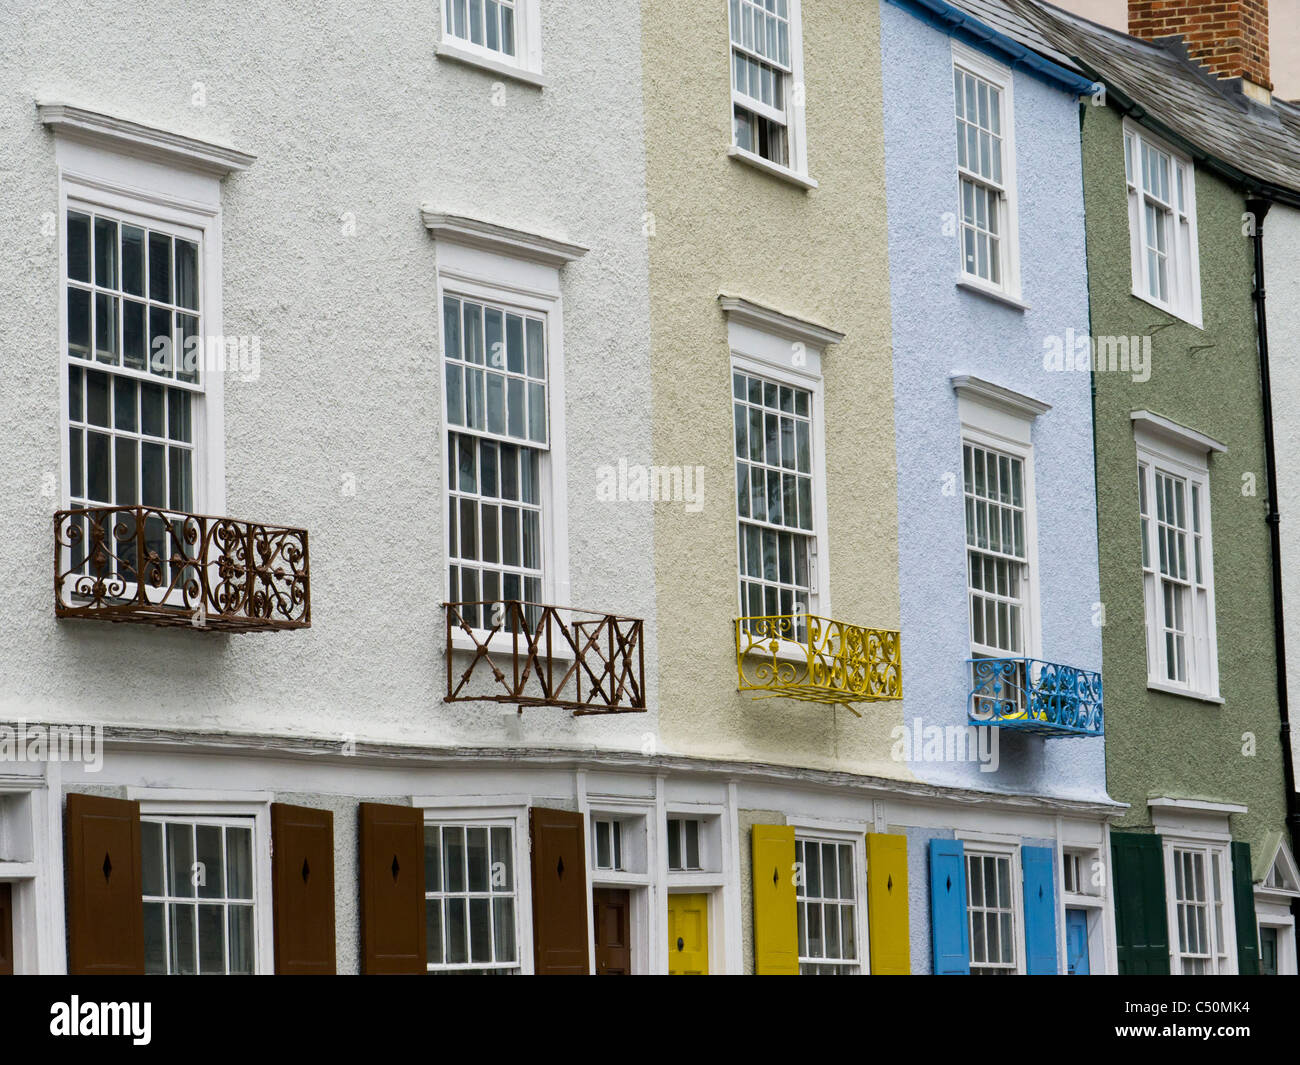 Balconies and shutters on a terrace of houses in a side street in Oxford, England. Stock Photo